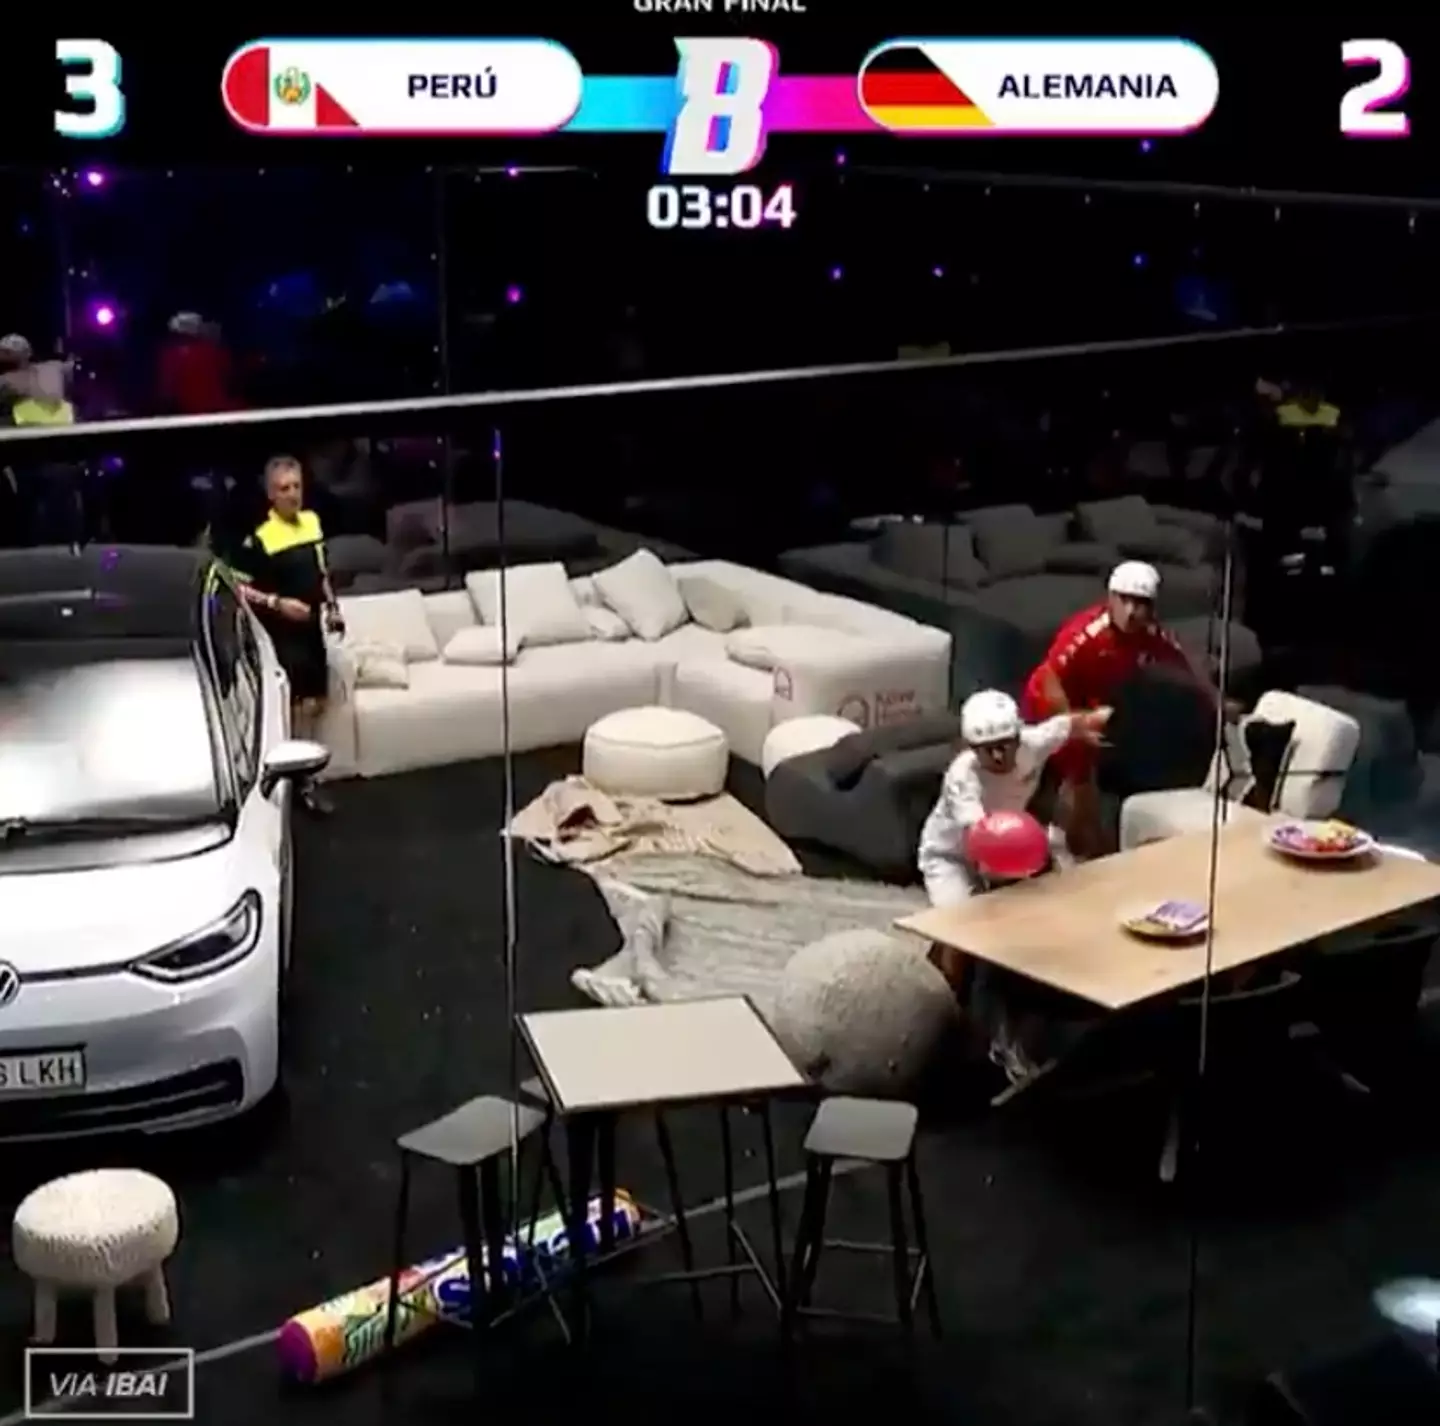 The Balloon World Cup is surprisingly wild.